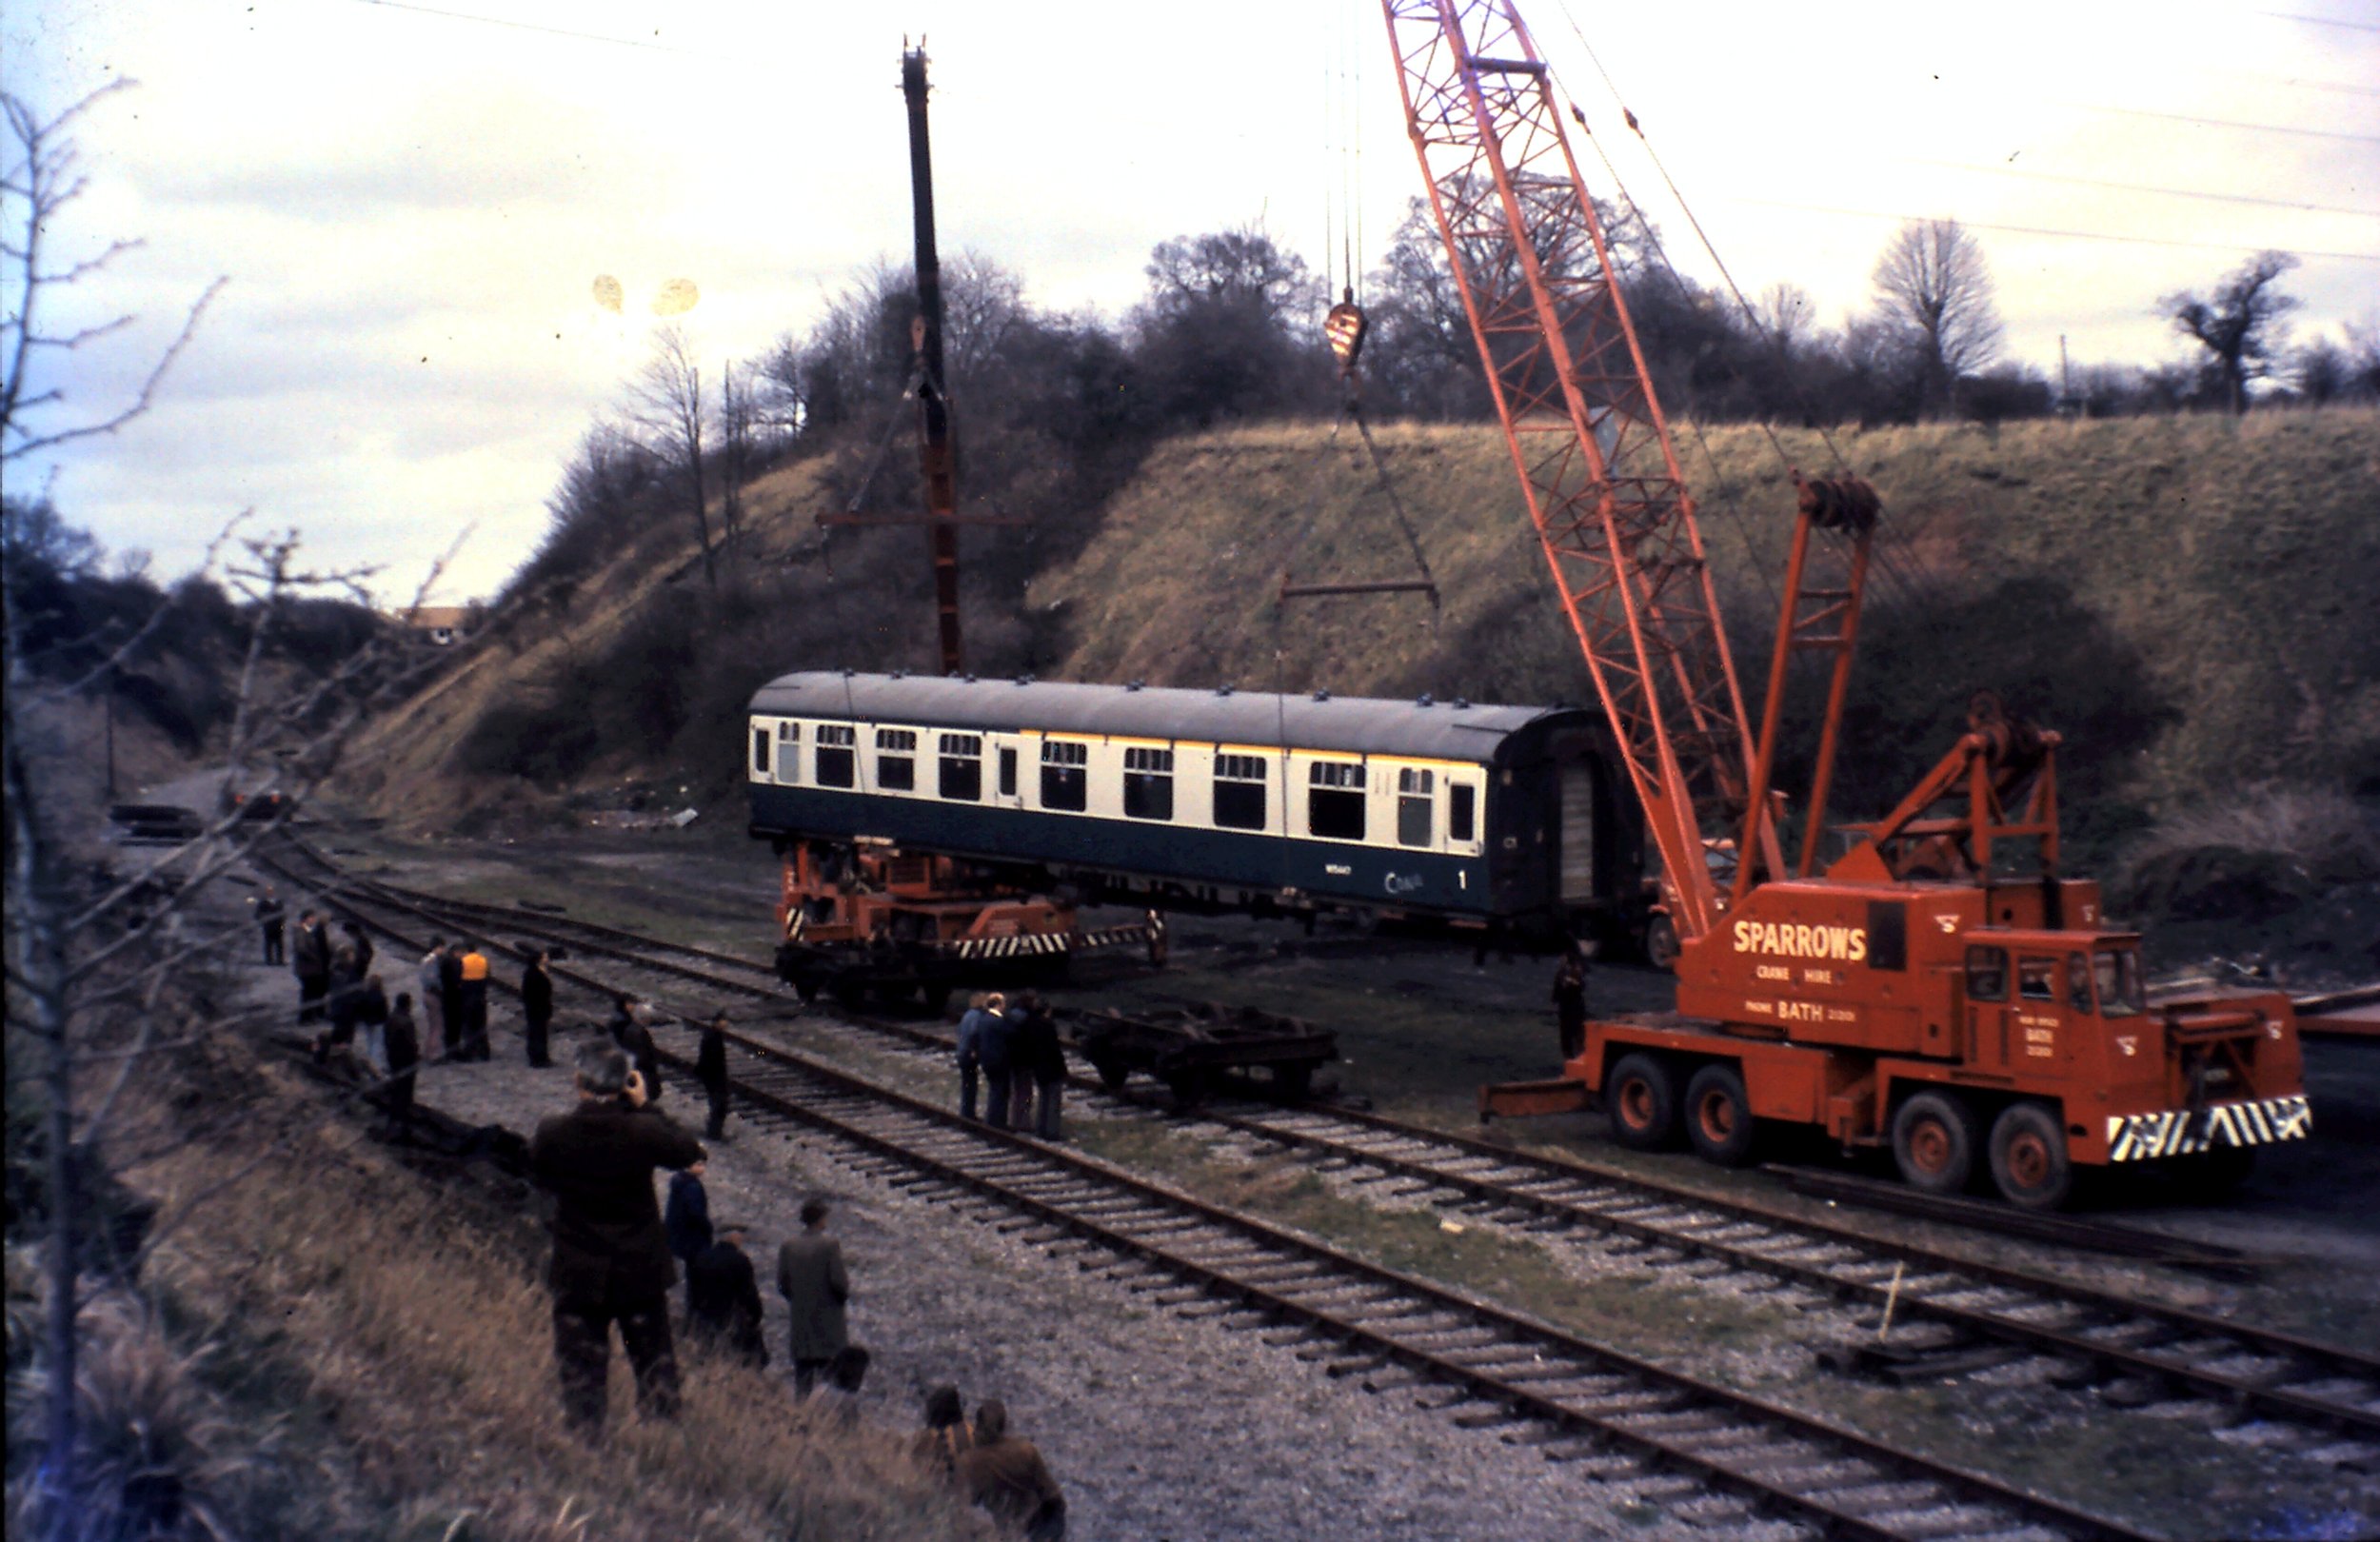 The body of 15447 is lowered onto its bogies.